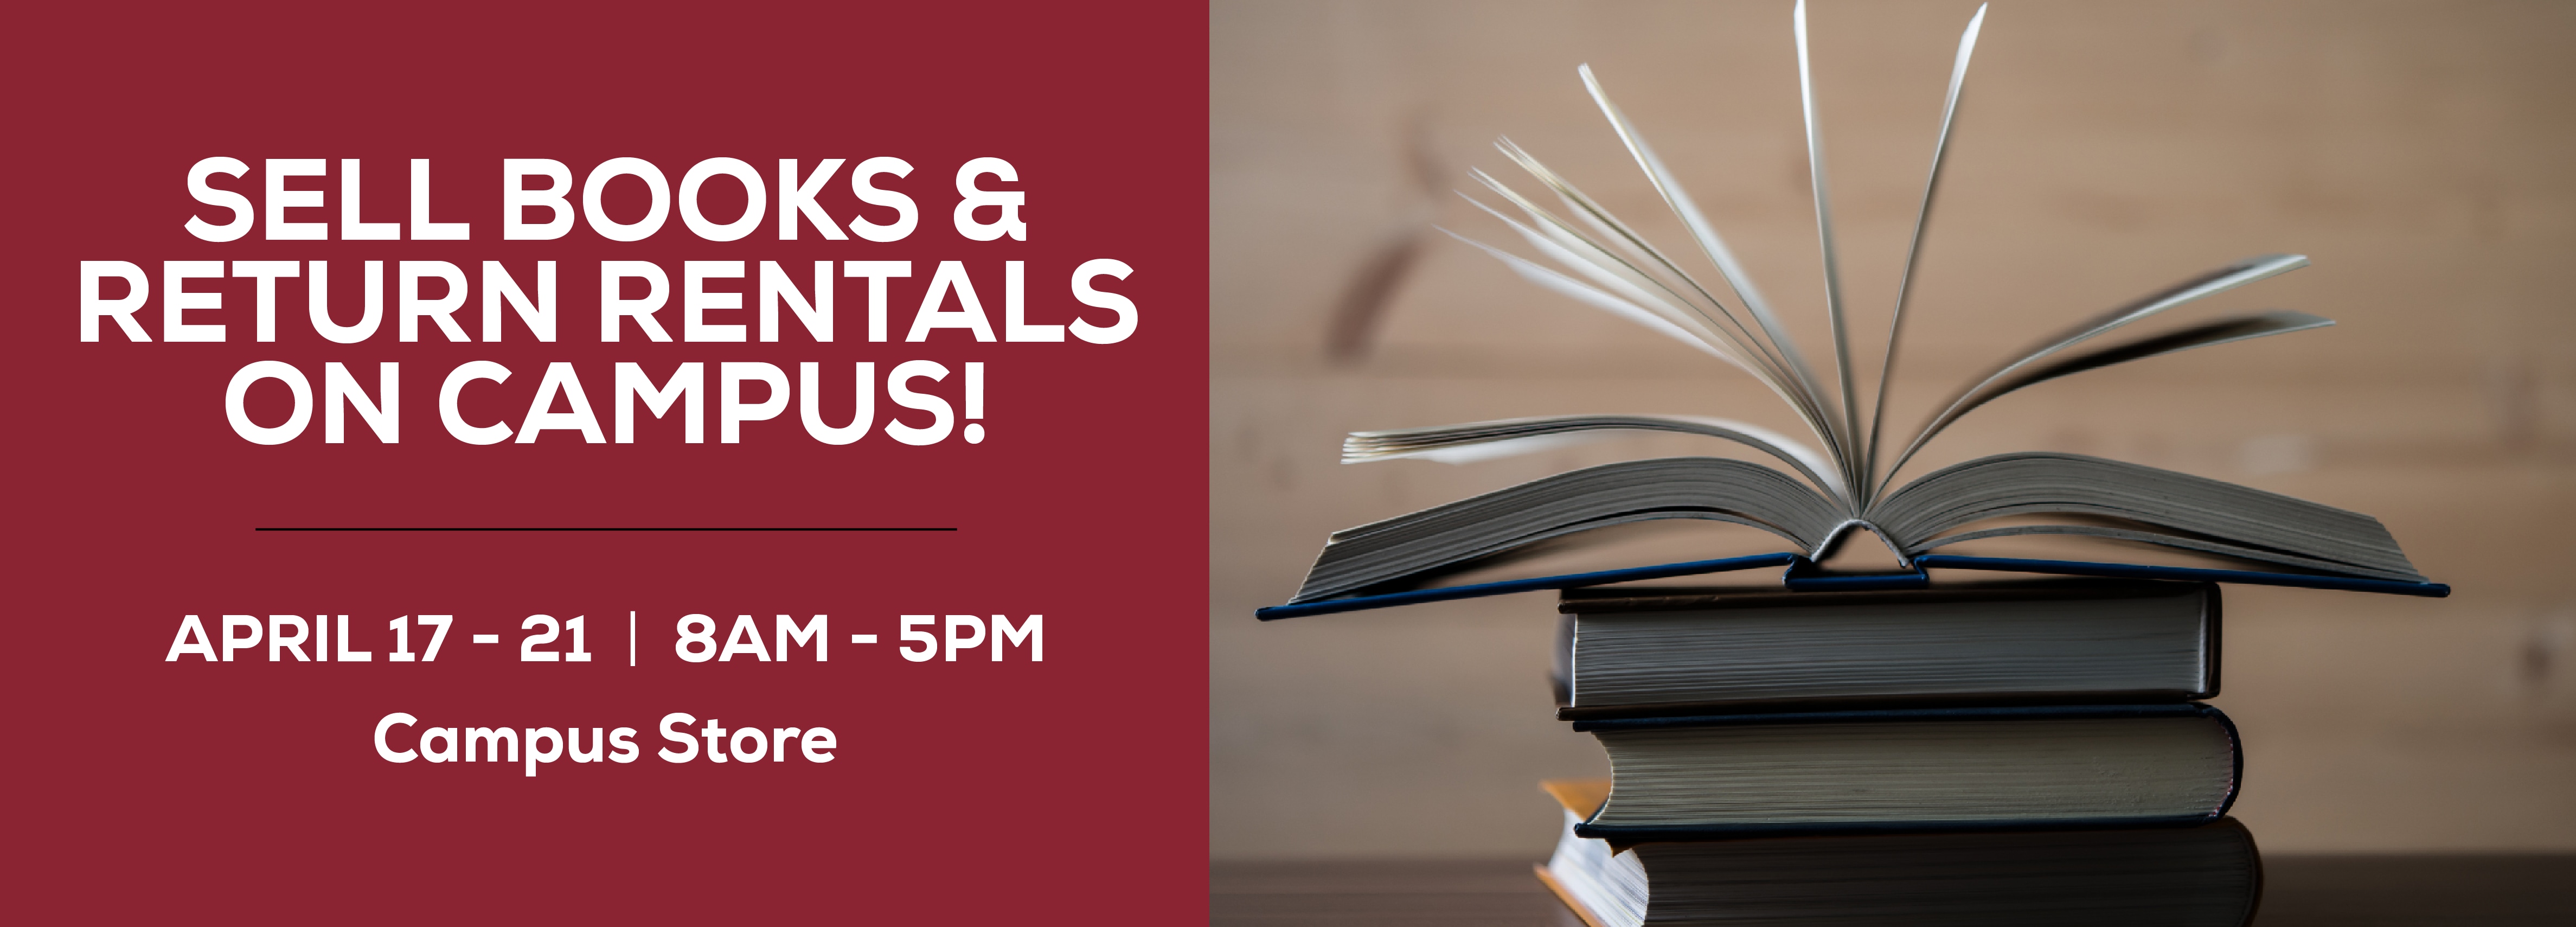 Sell your books and return rentals on campus! April 17th through 21st.. 8am to 5pm at the Campus Store